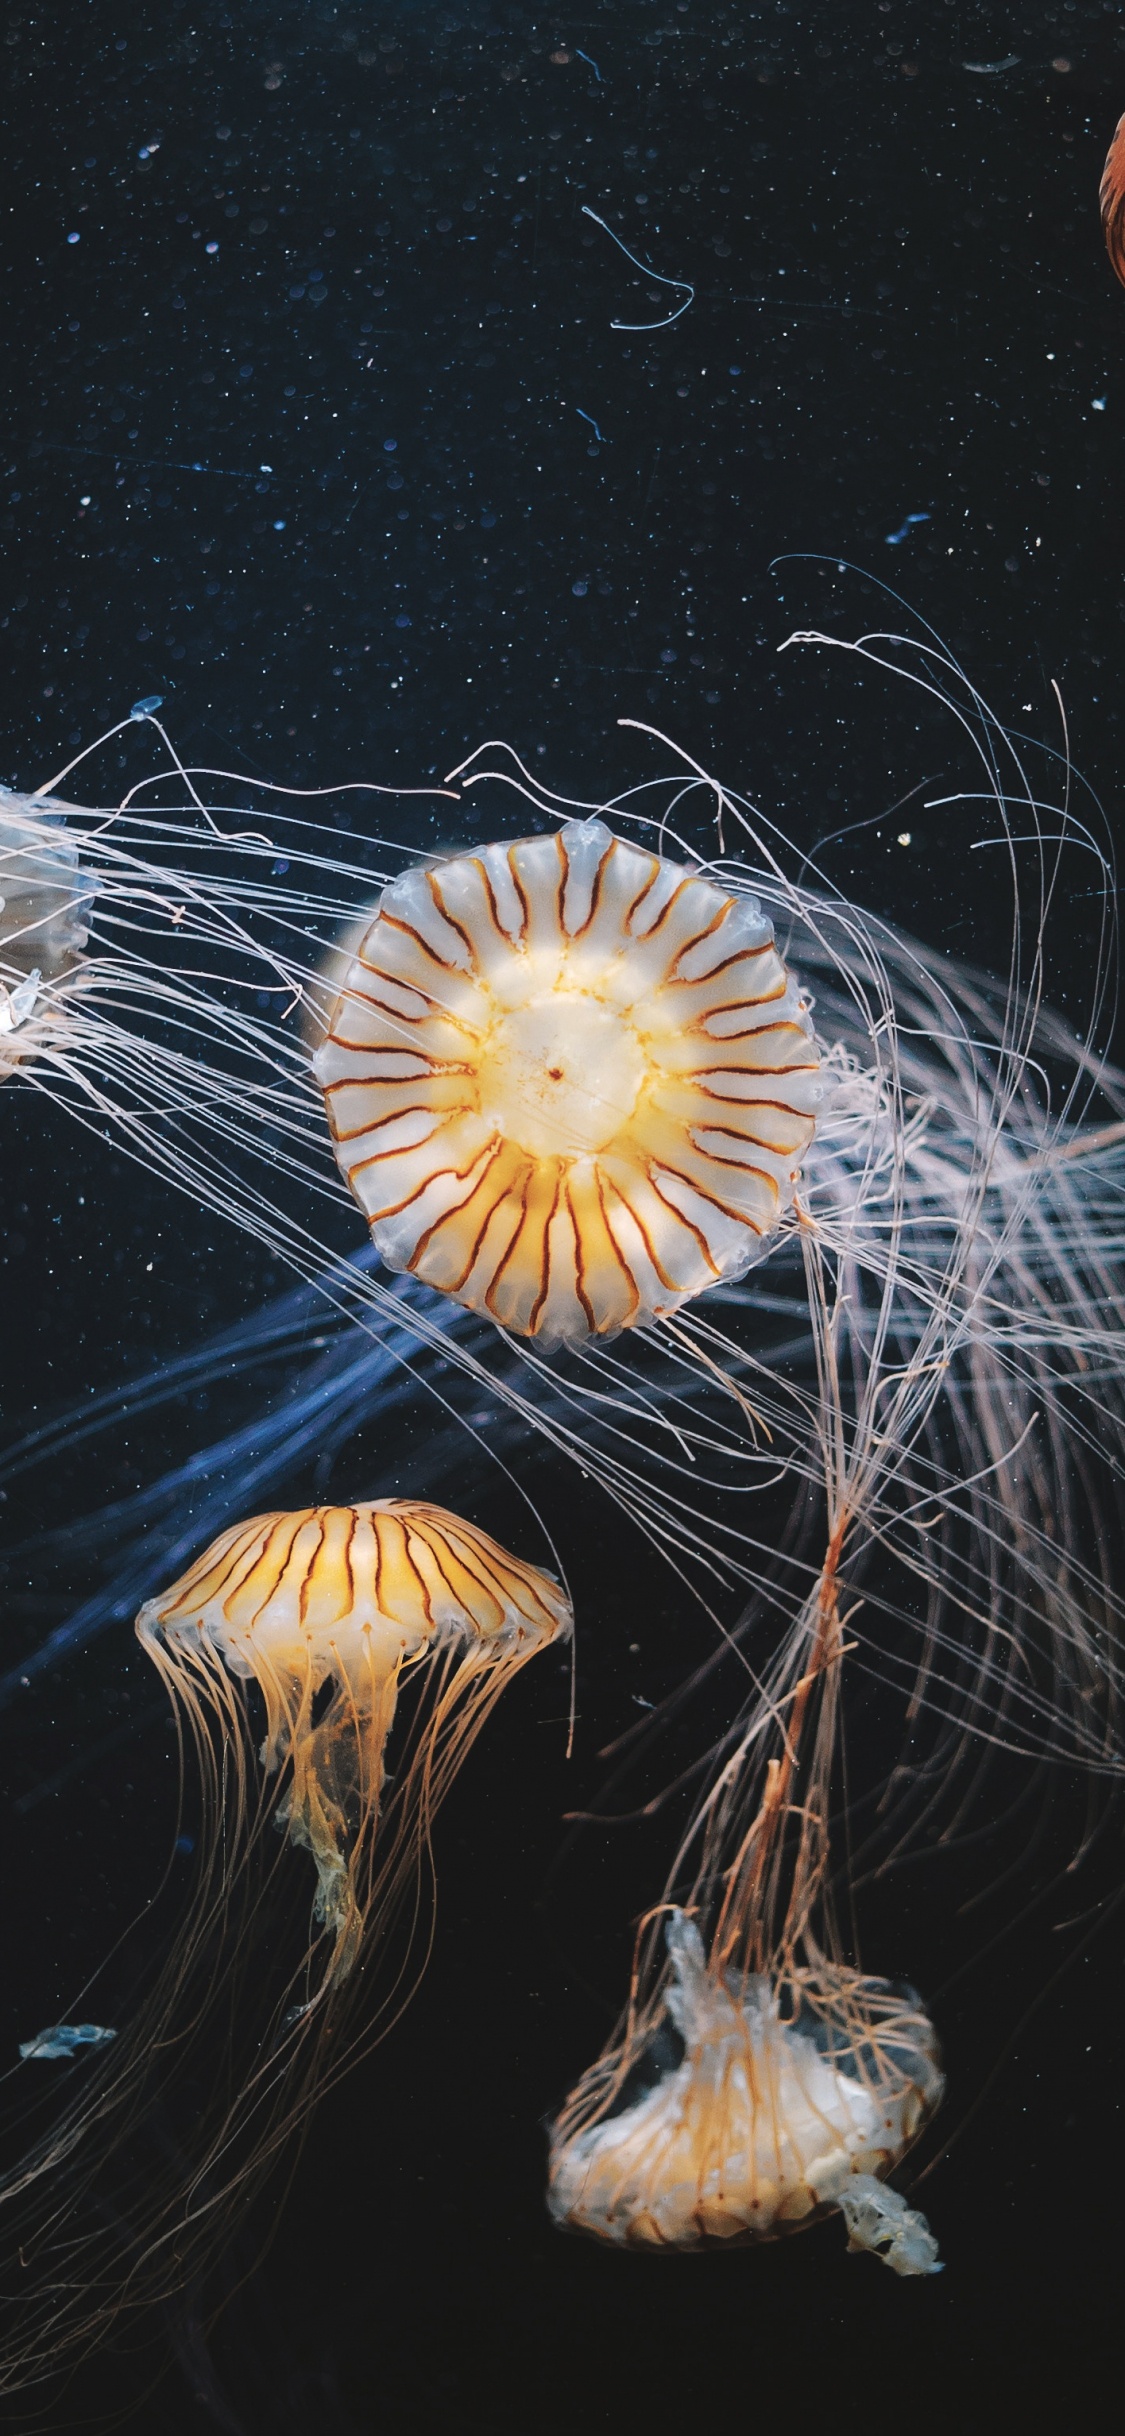 White and Brown Jellyfish in Water. Wallpaper in 1125x2436 Resolution